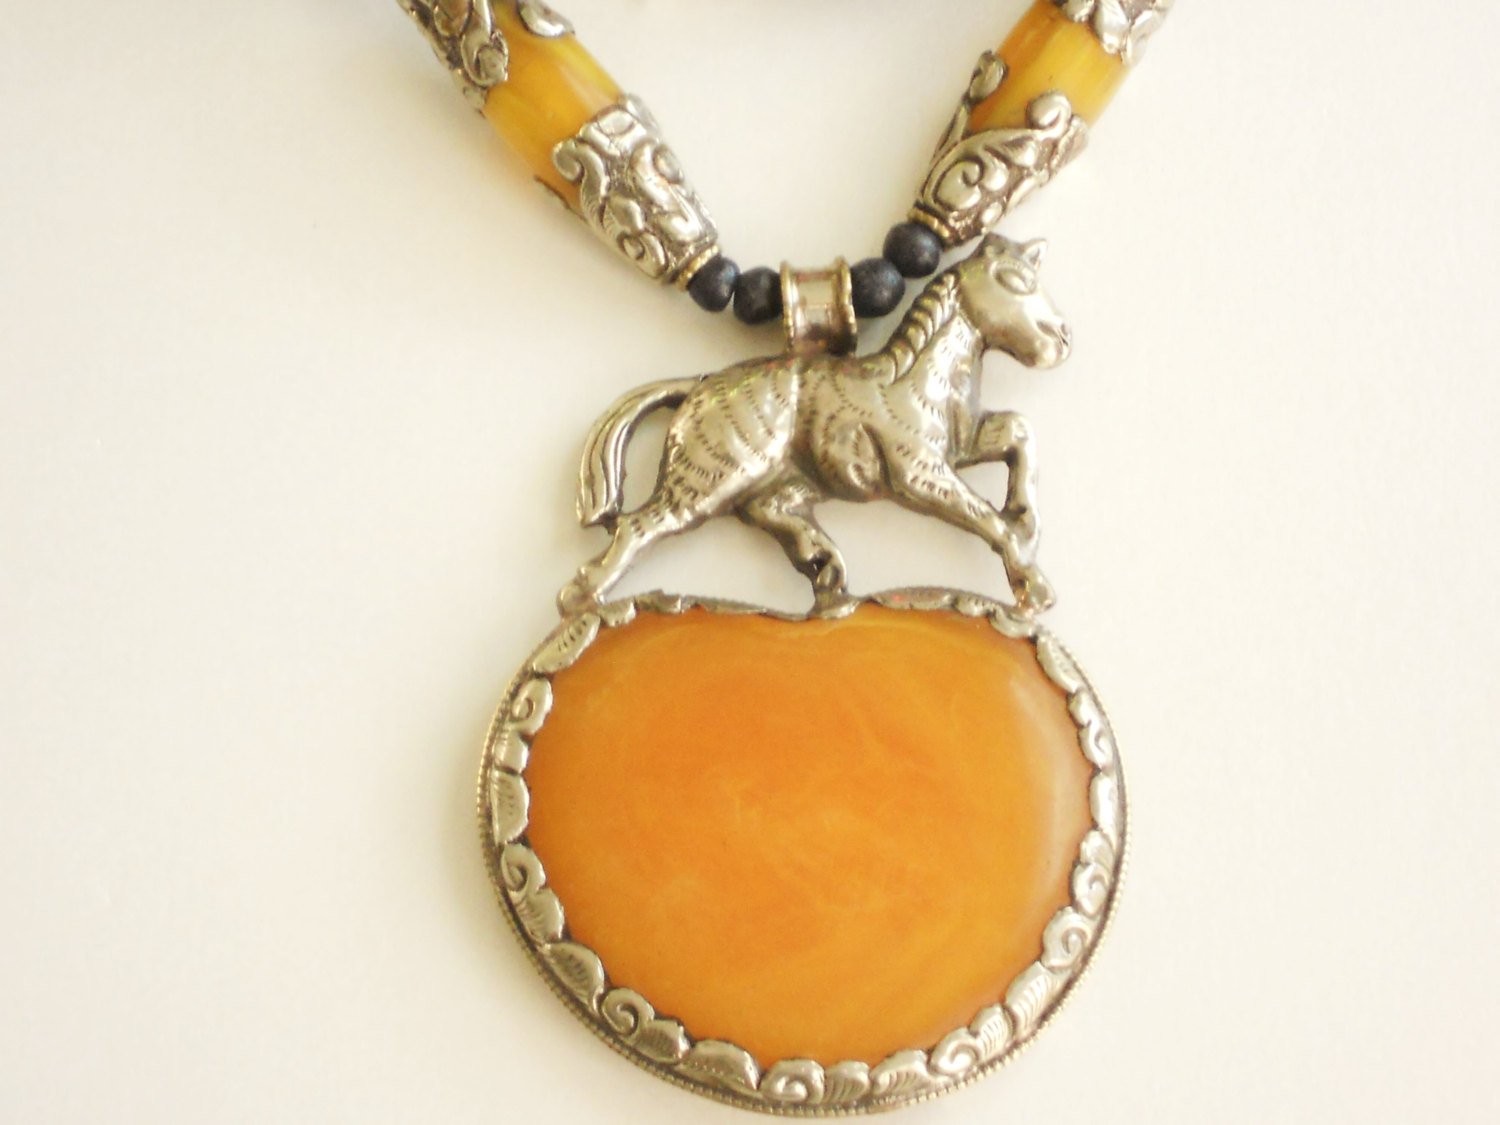 Horse Pendant Amber Resin Repousee Carved Bone Statement Necklace Divinite' Jewellry